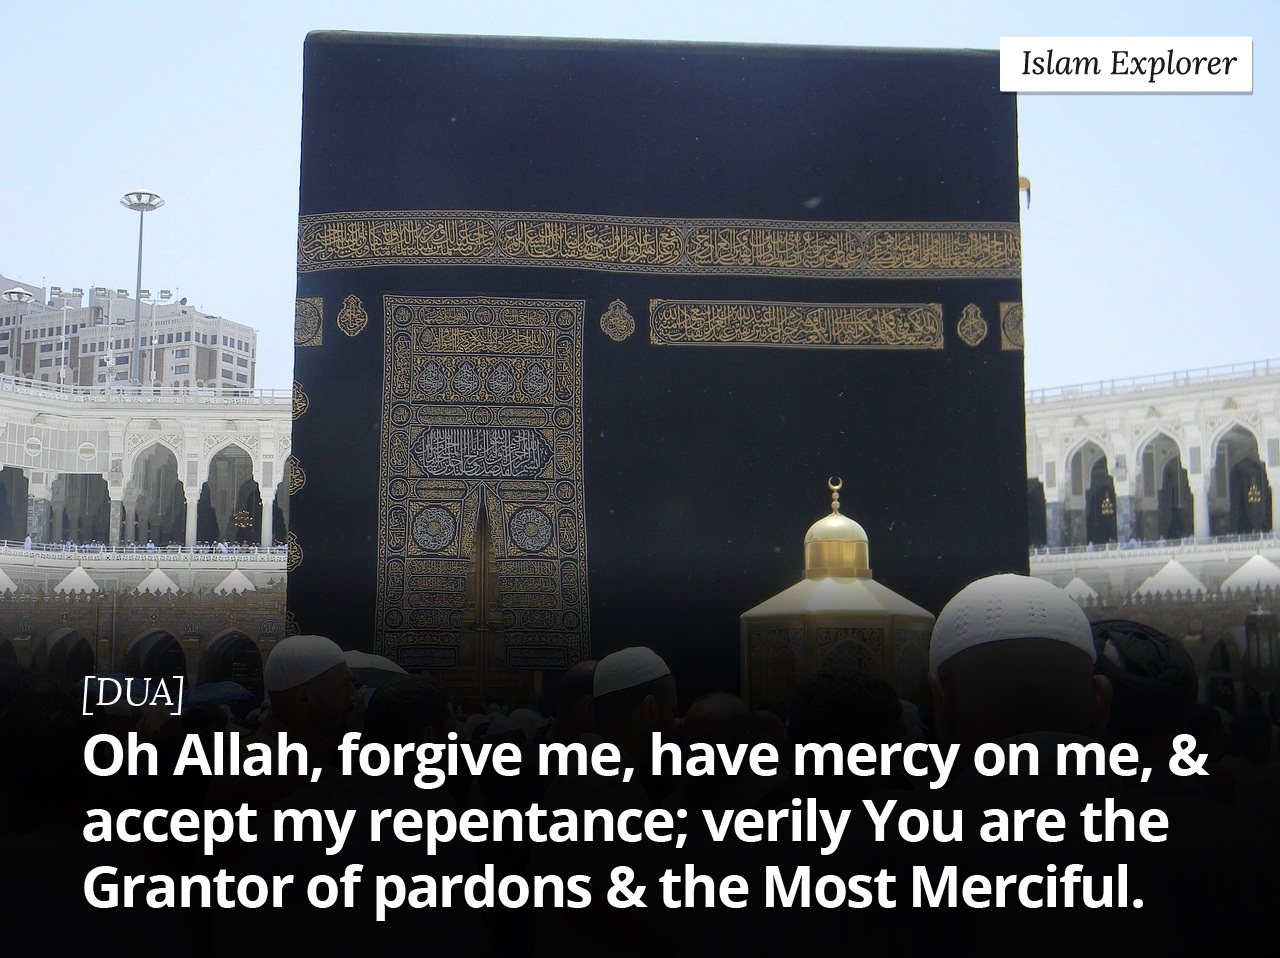 Oh Allah, forgive me, have mercy on me